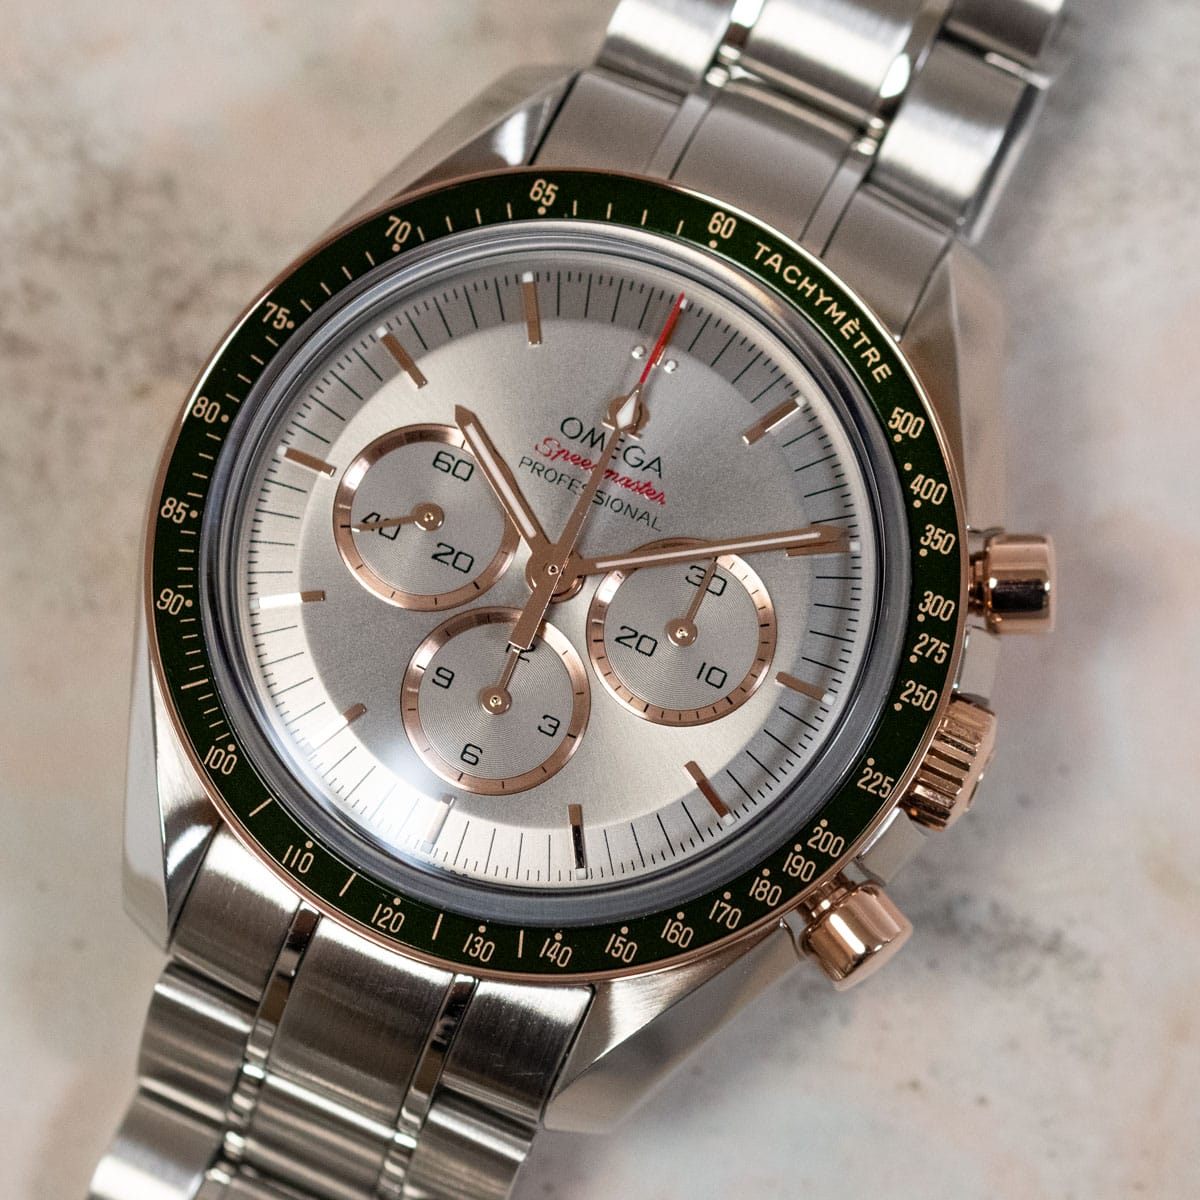 Stylied photo of  of Speedmaster Tokyo 2020 Olympic